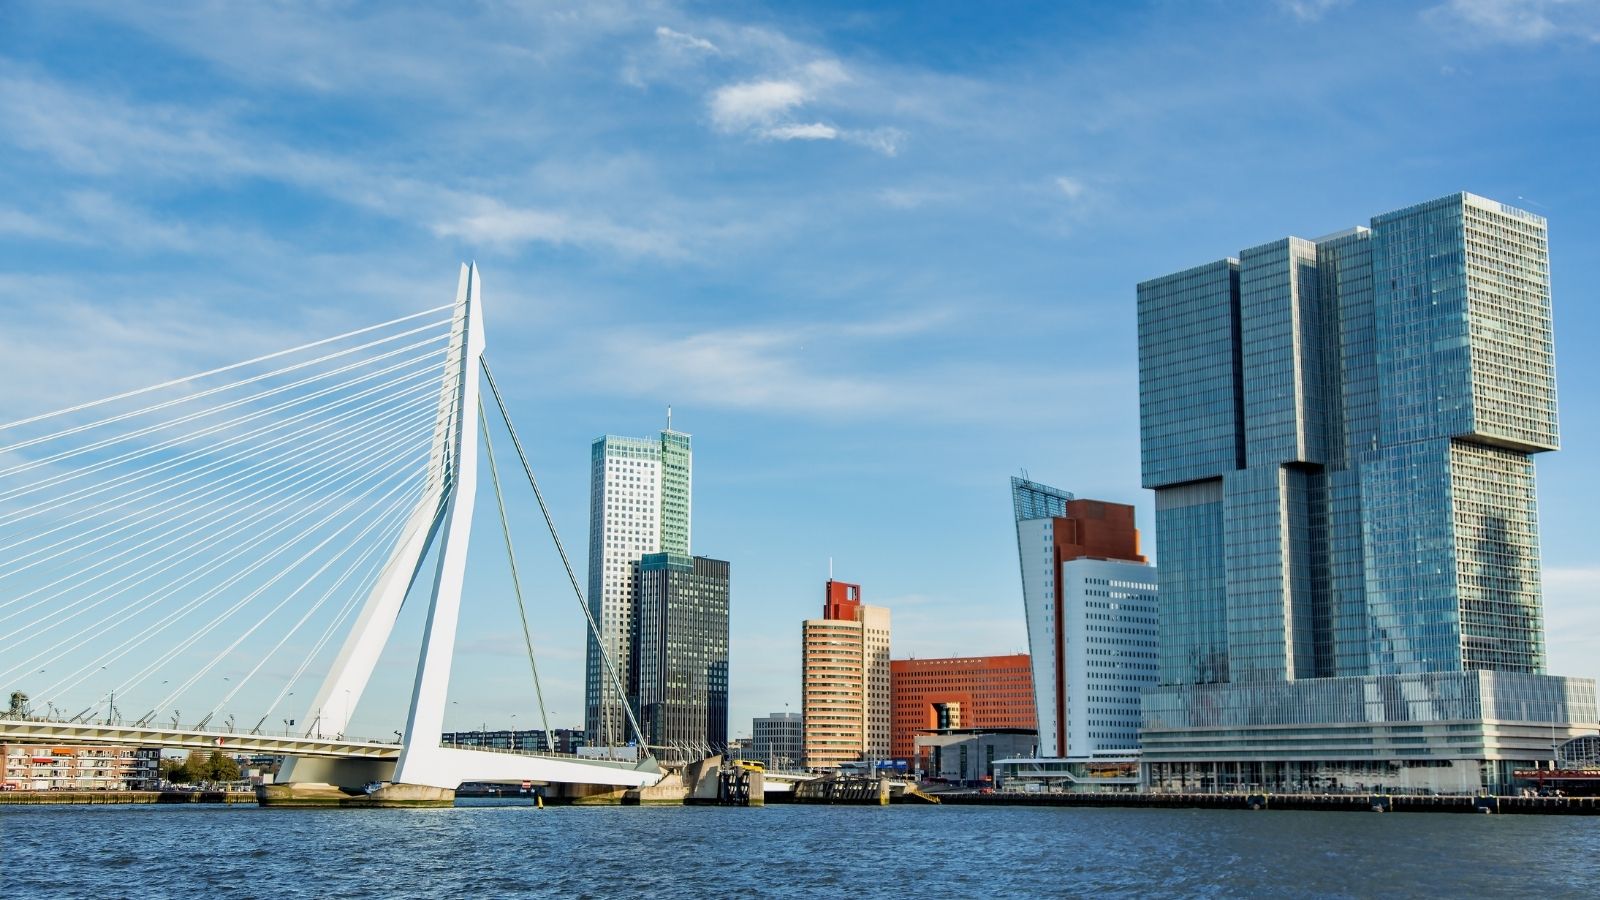 A cityscape of Rotterdam, with tall buildings and a bridge over water